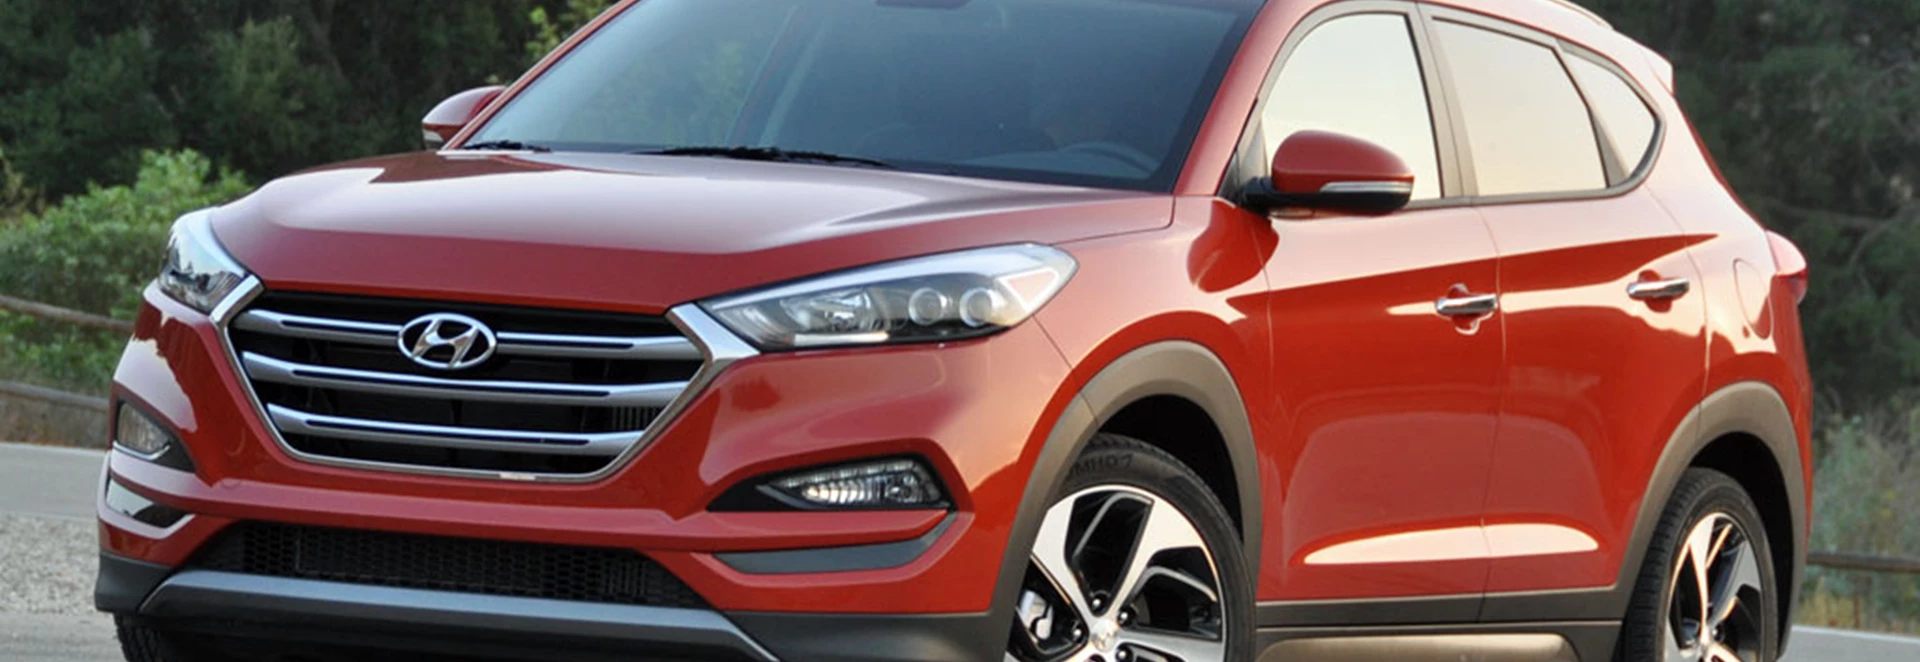 Hyundai Tucson gets faster and greener 139bhp 1.7-litre DCT auto